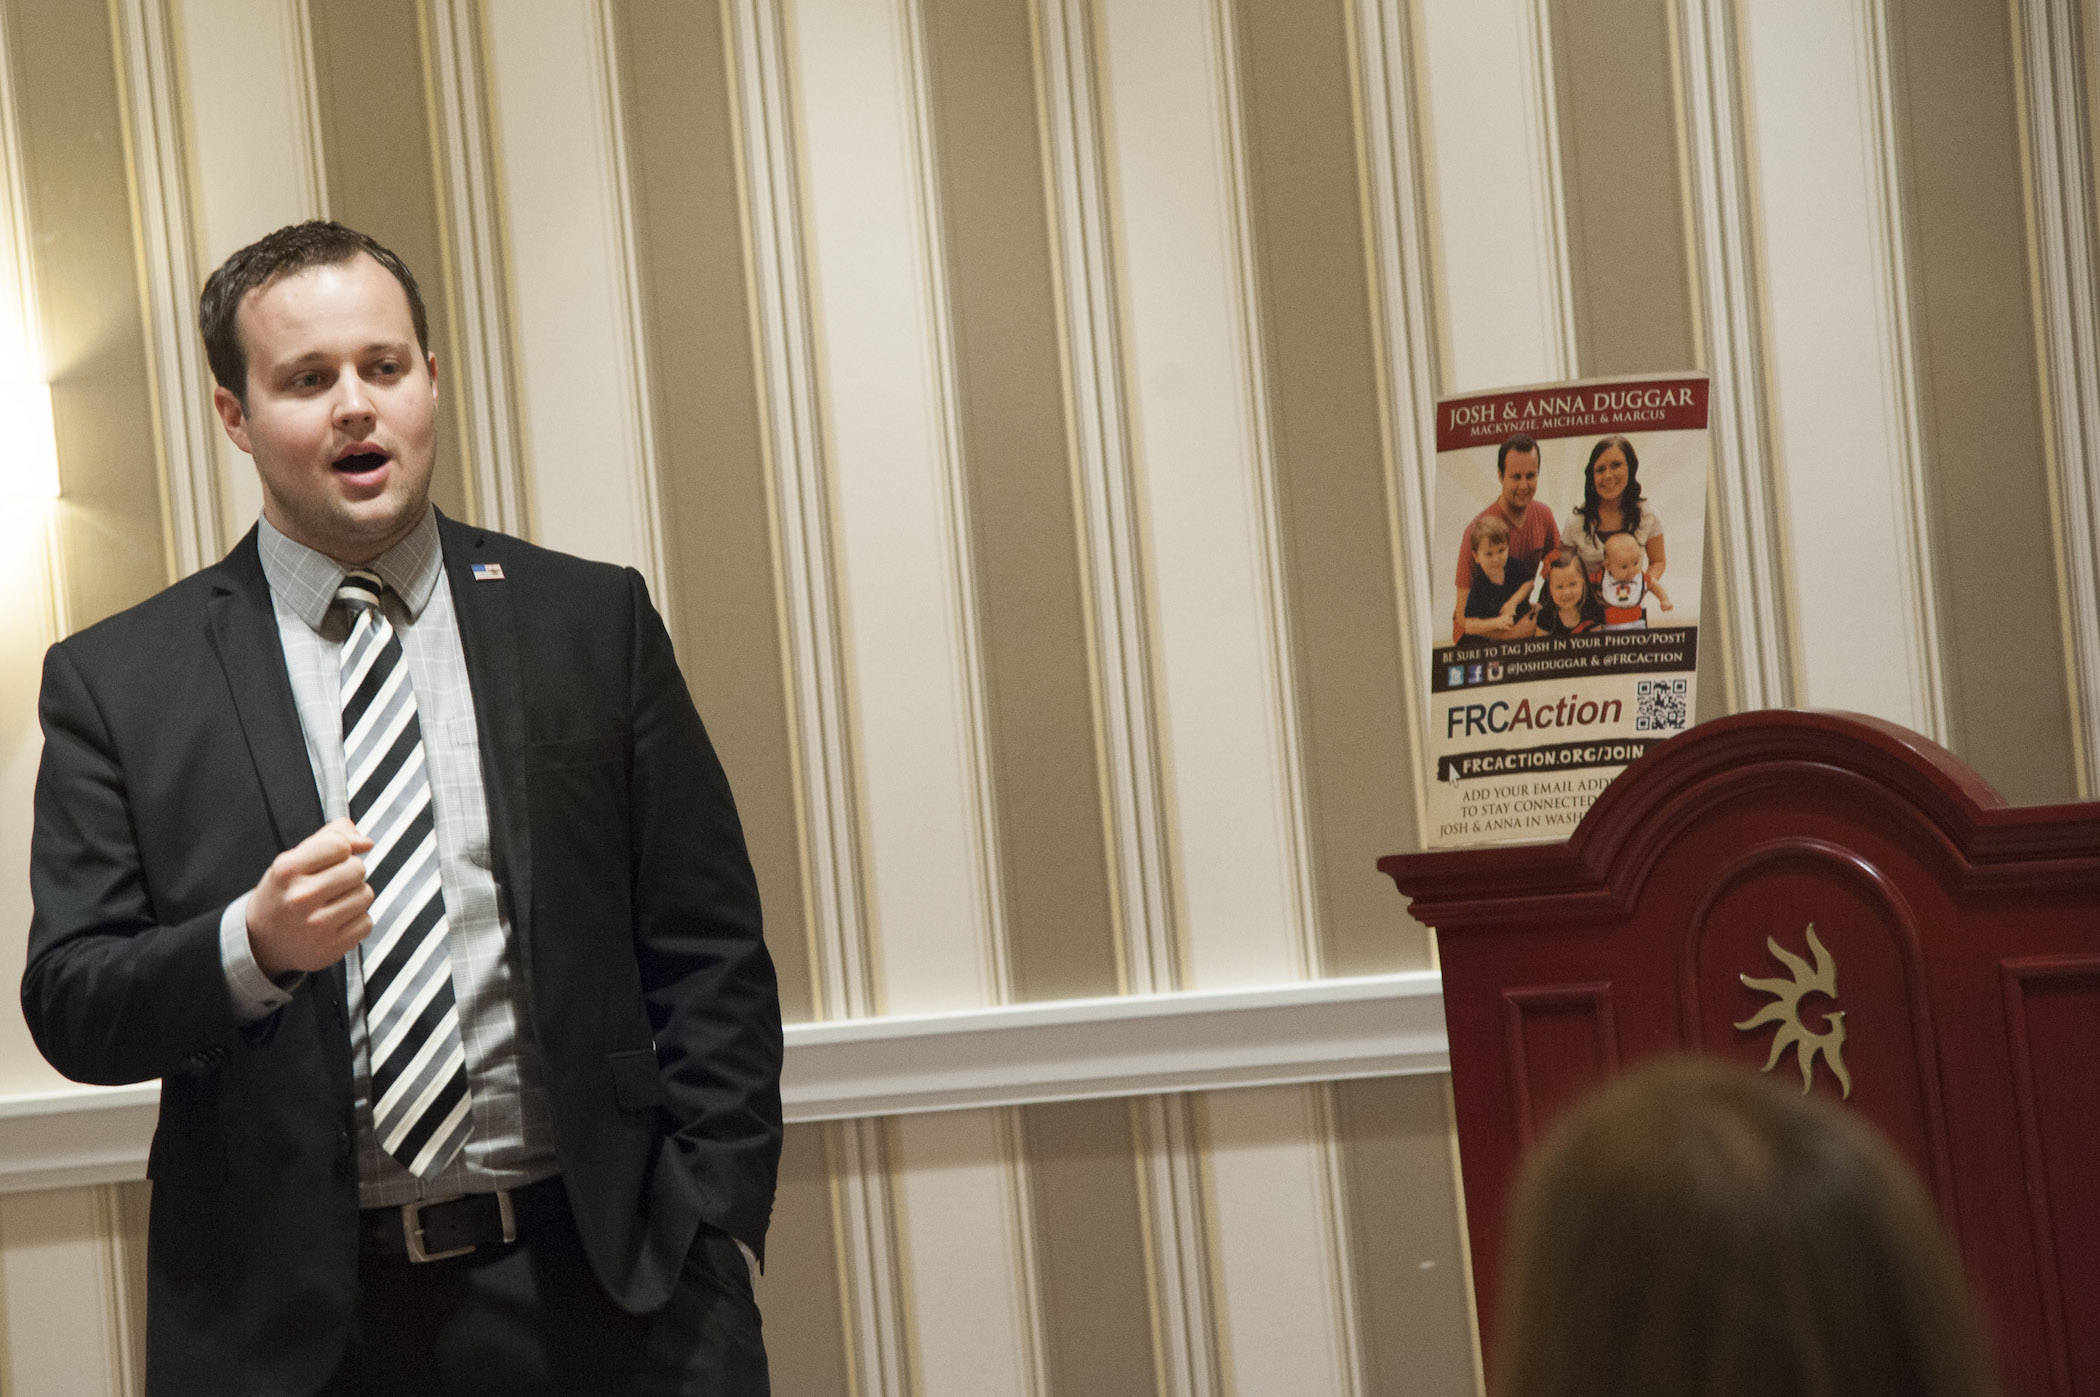 Josh Duggar in a suit speaking at a conference